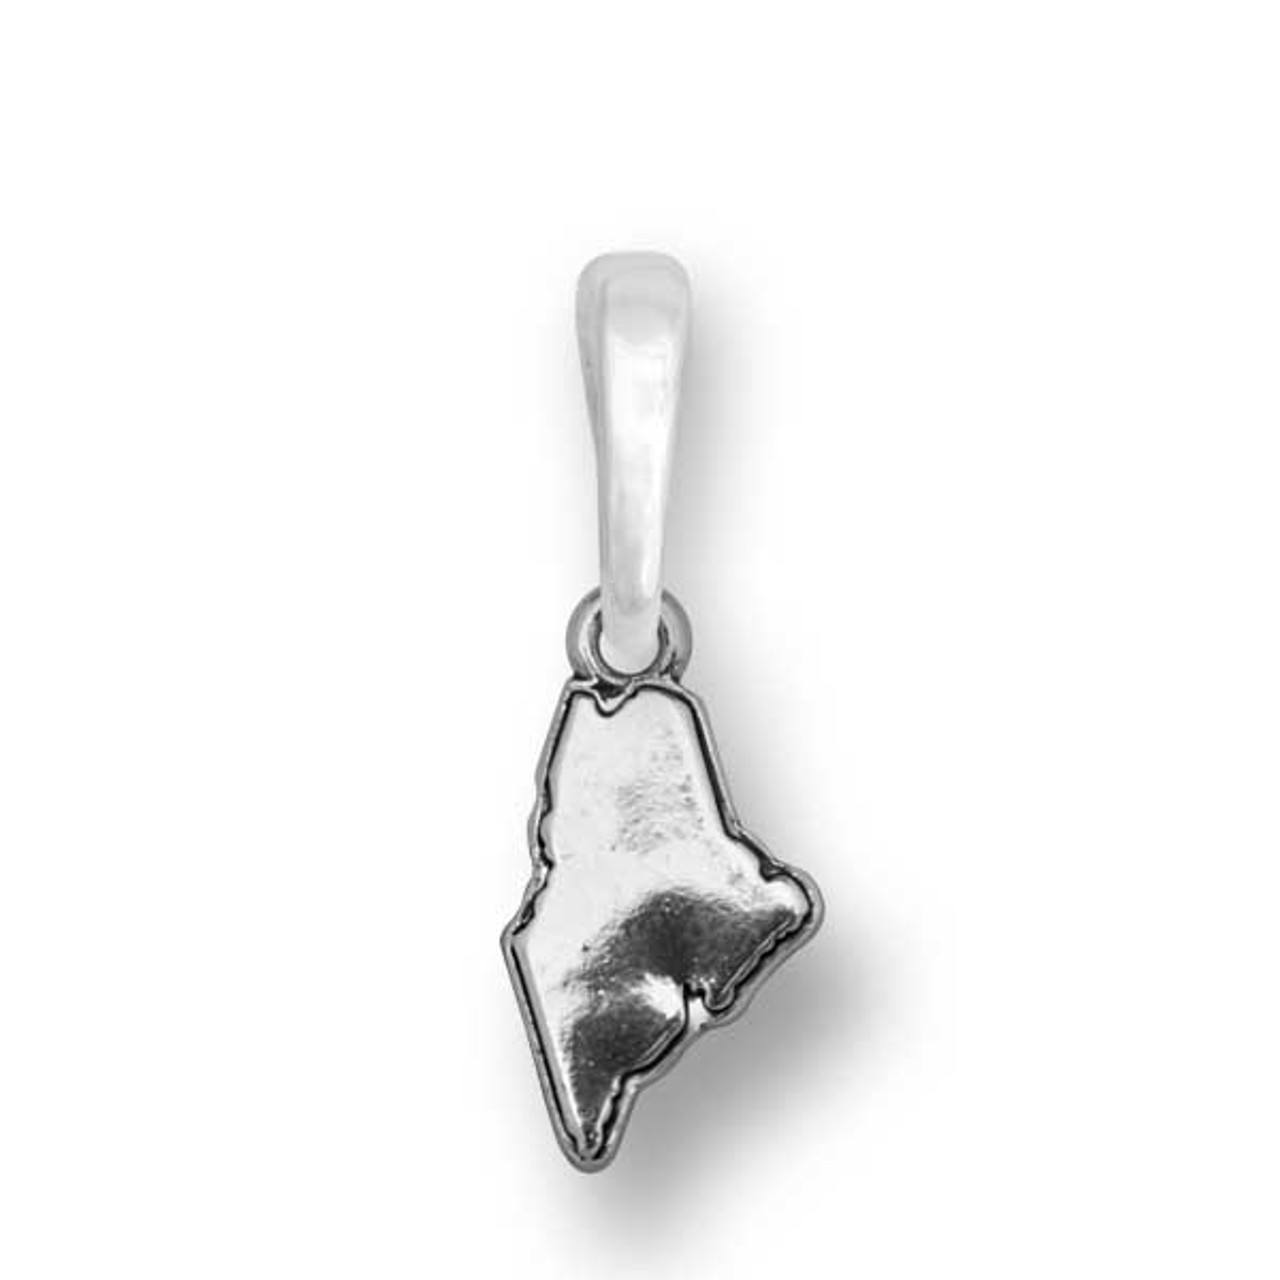 Charming Choices Charm- State / Choose Any State